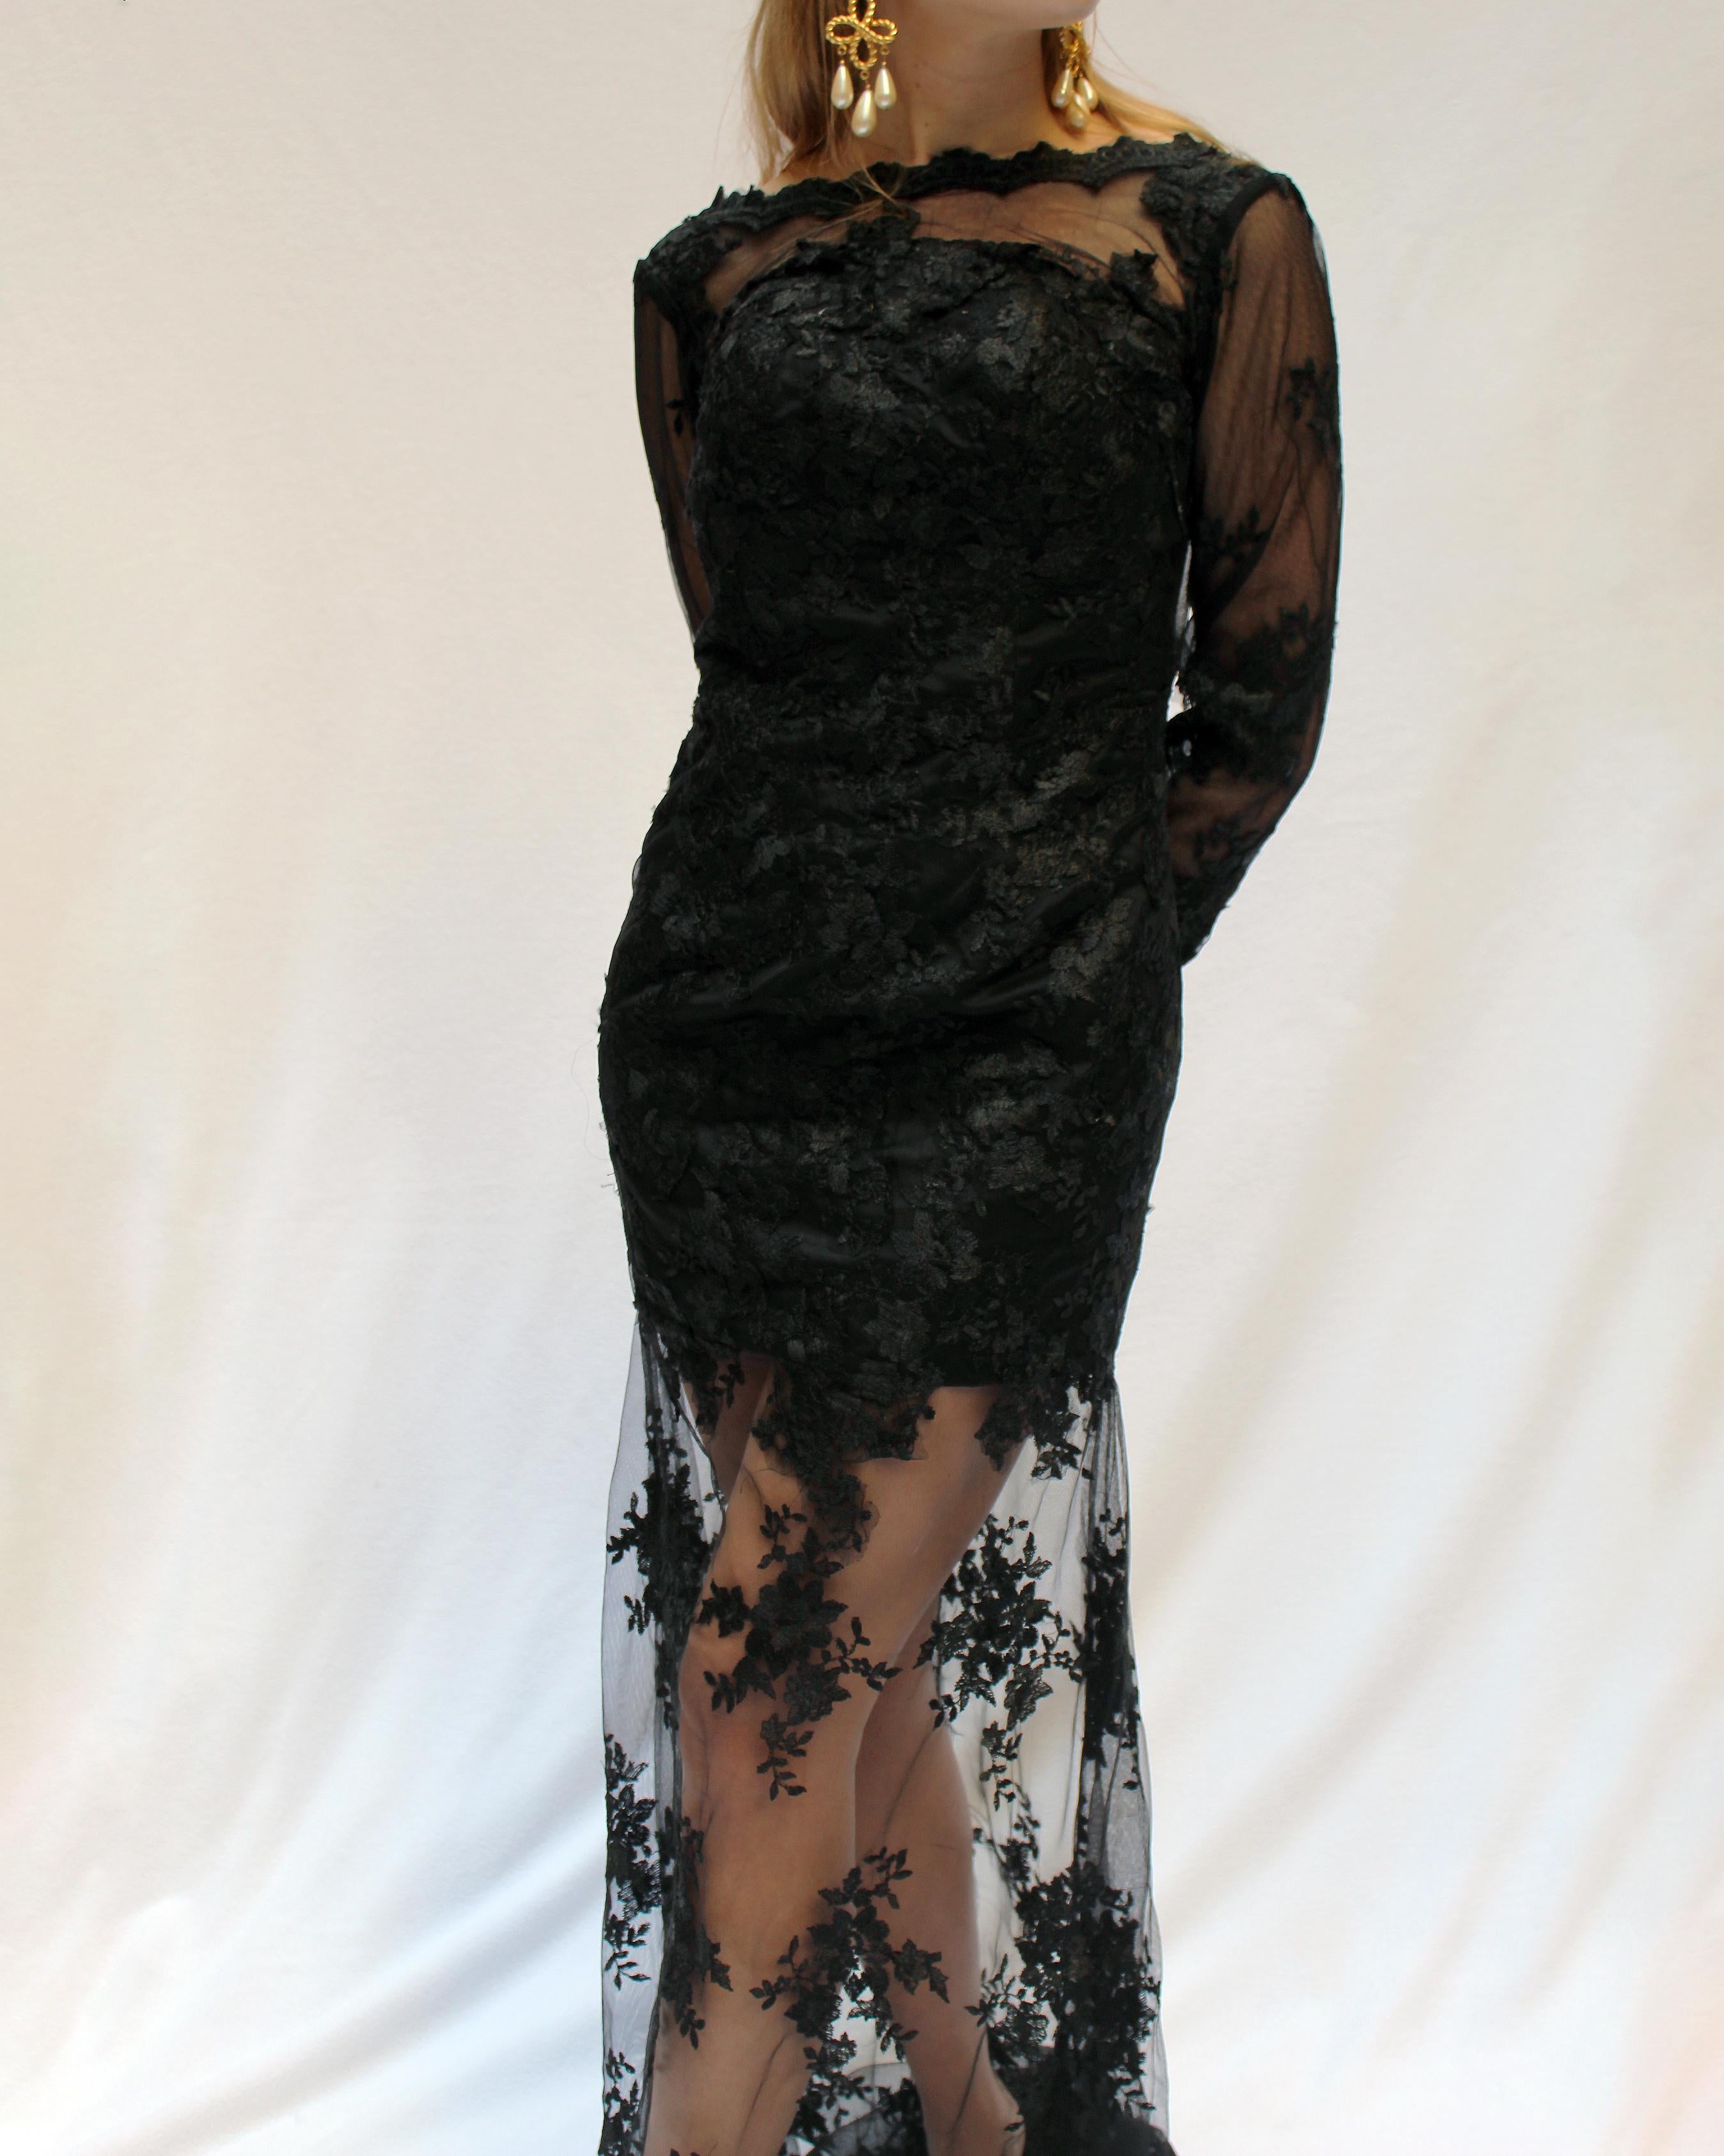 This vintage black lace gown reminds me of Dolce & Gabbana 90s designs— so simultaneously sensual, and classic. Made in the 90s or early 2000s, this piece was custom made, with a hidden corset bodice, and gorgeous lace throughout. The bottom of the